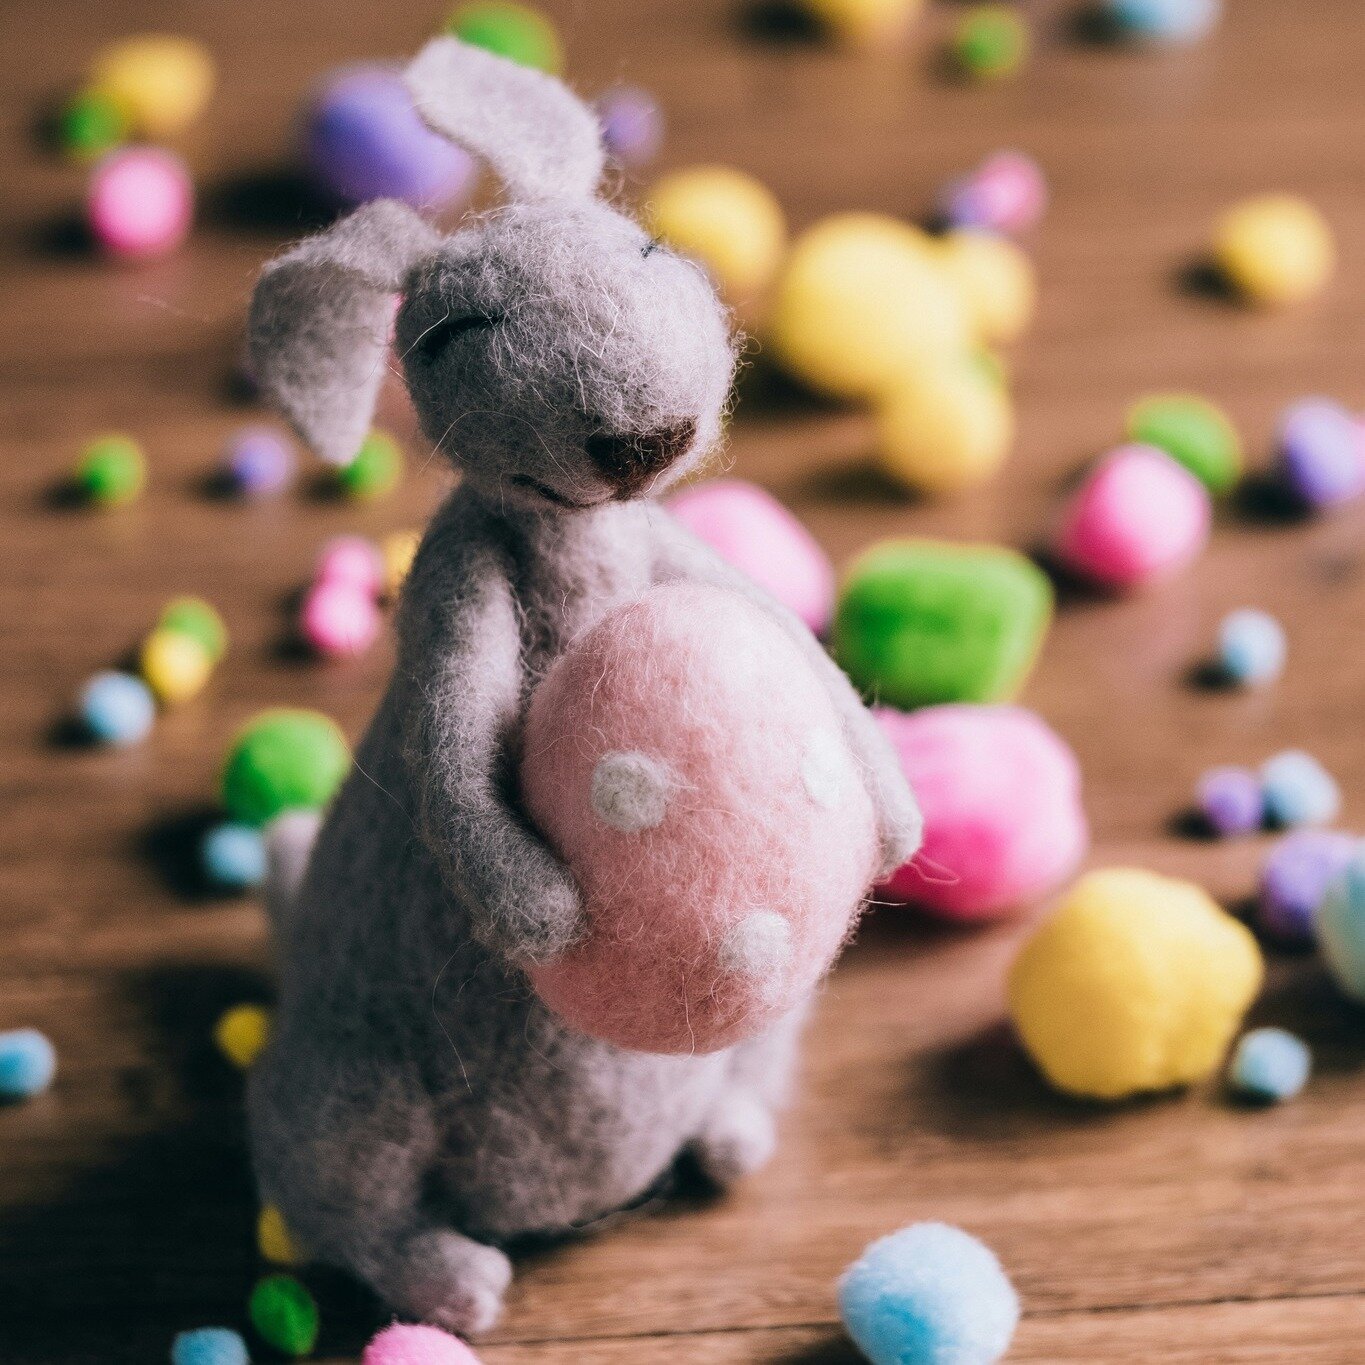 No Easter Egg Hunt necessary for this offer - just read on to find out what it is!

#managementdevelopment #leadershipdevelopment #leadershiptraining
#managerdevelopment #growyourown #leadershipskills #managementskills #managementtraining 

https://w